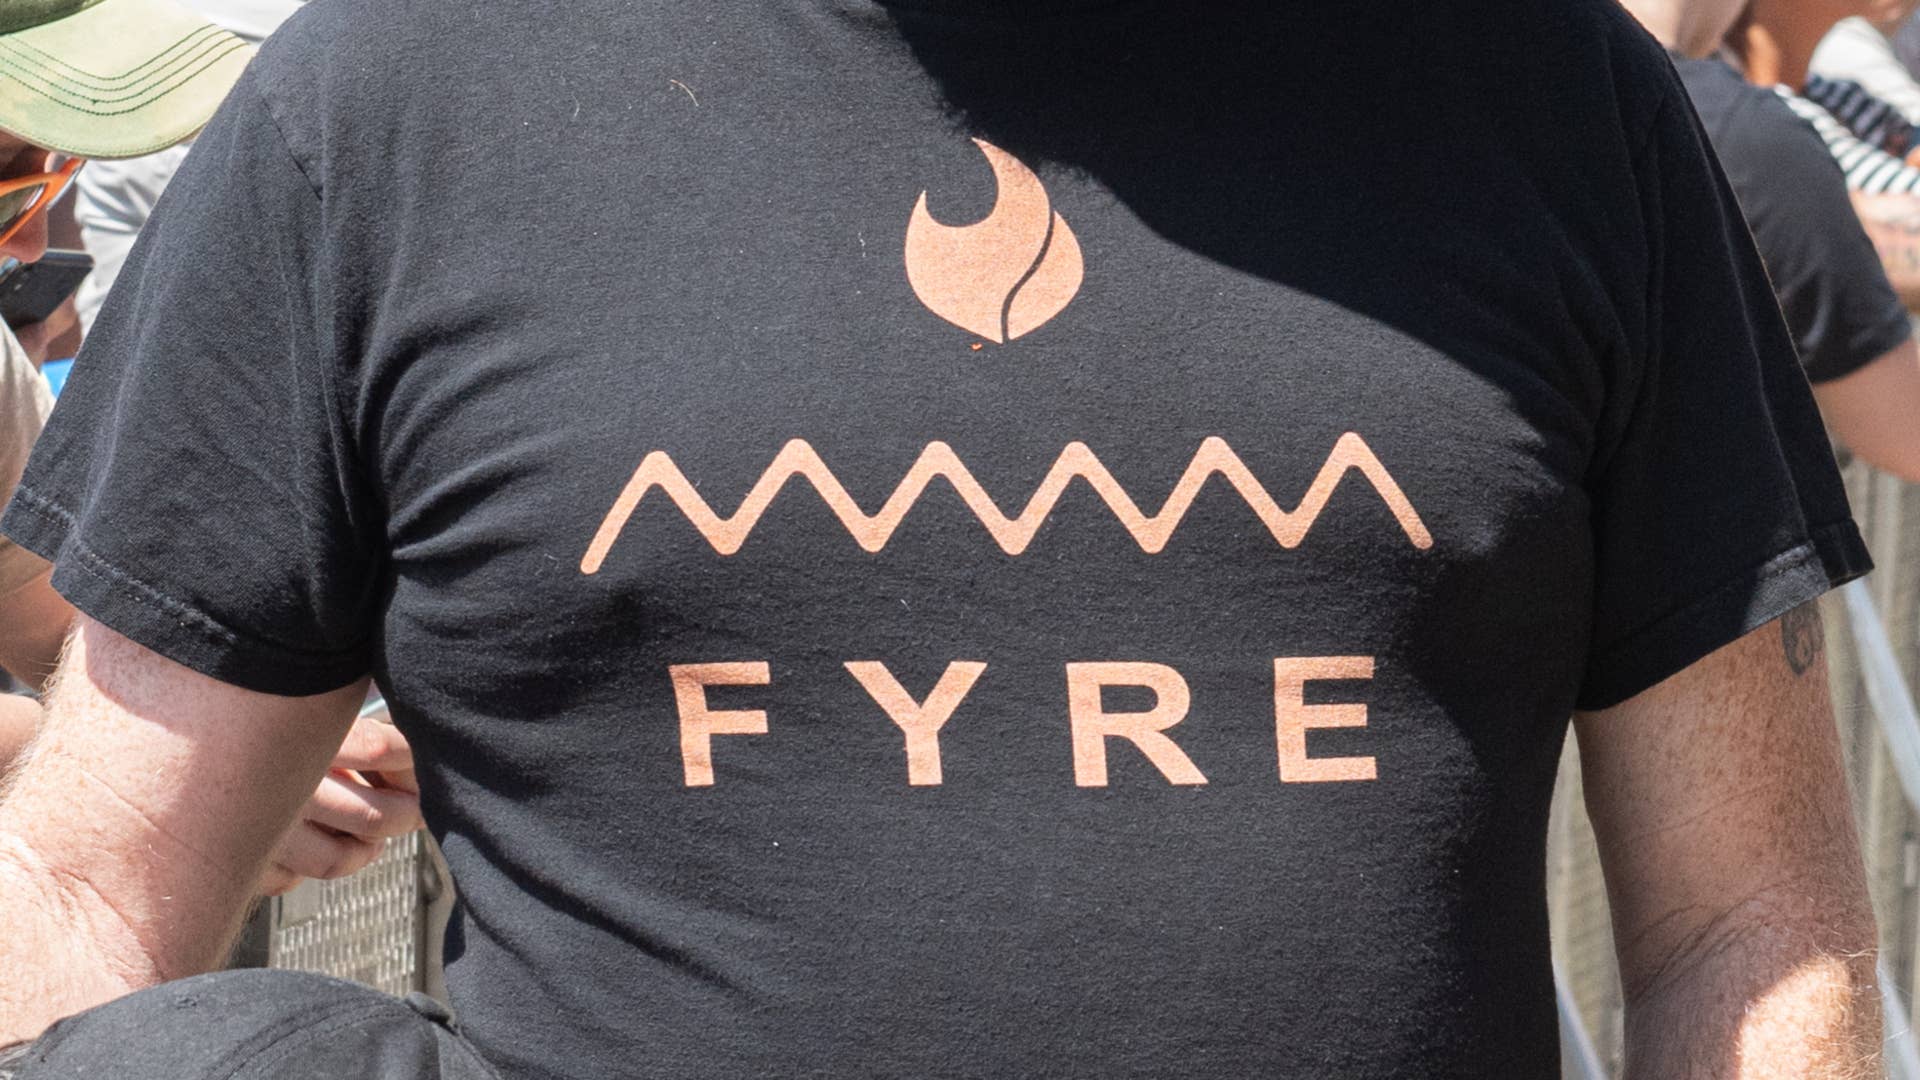 An attendee wears a Fyre shirt during BottleRock Napa Valley at Napa Valley Expo.